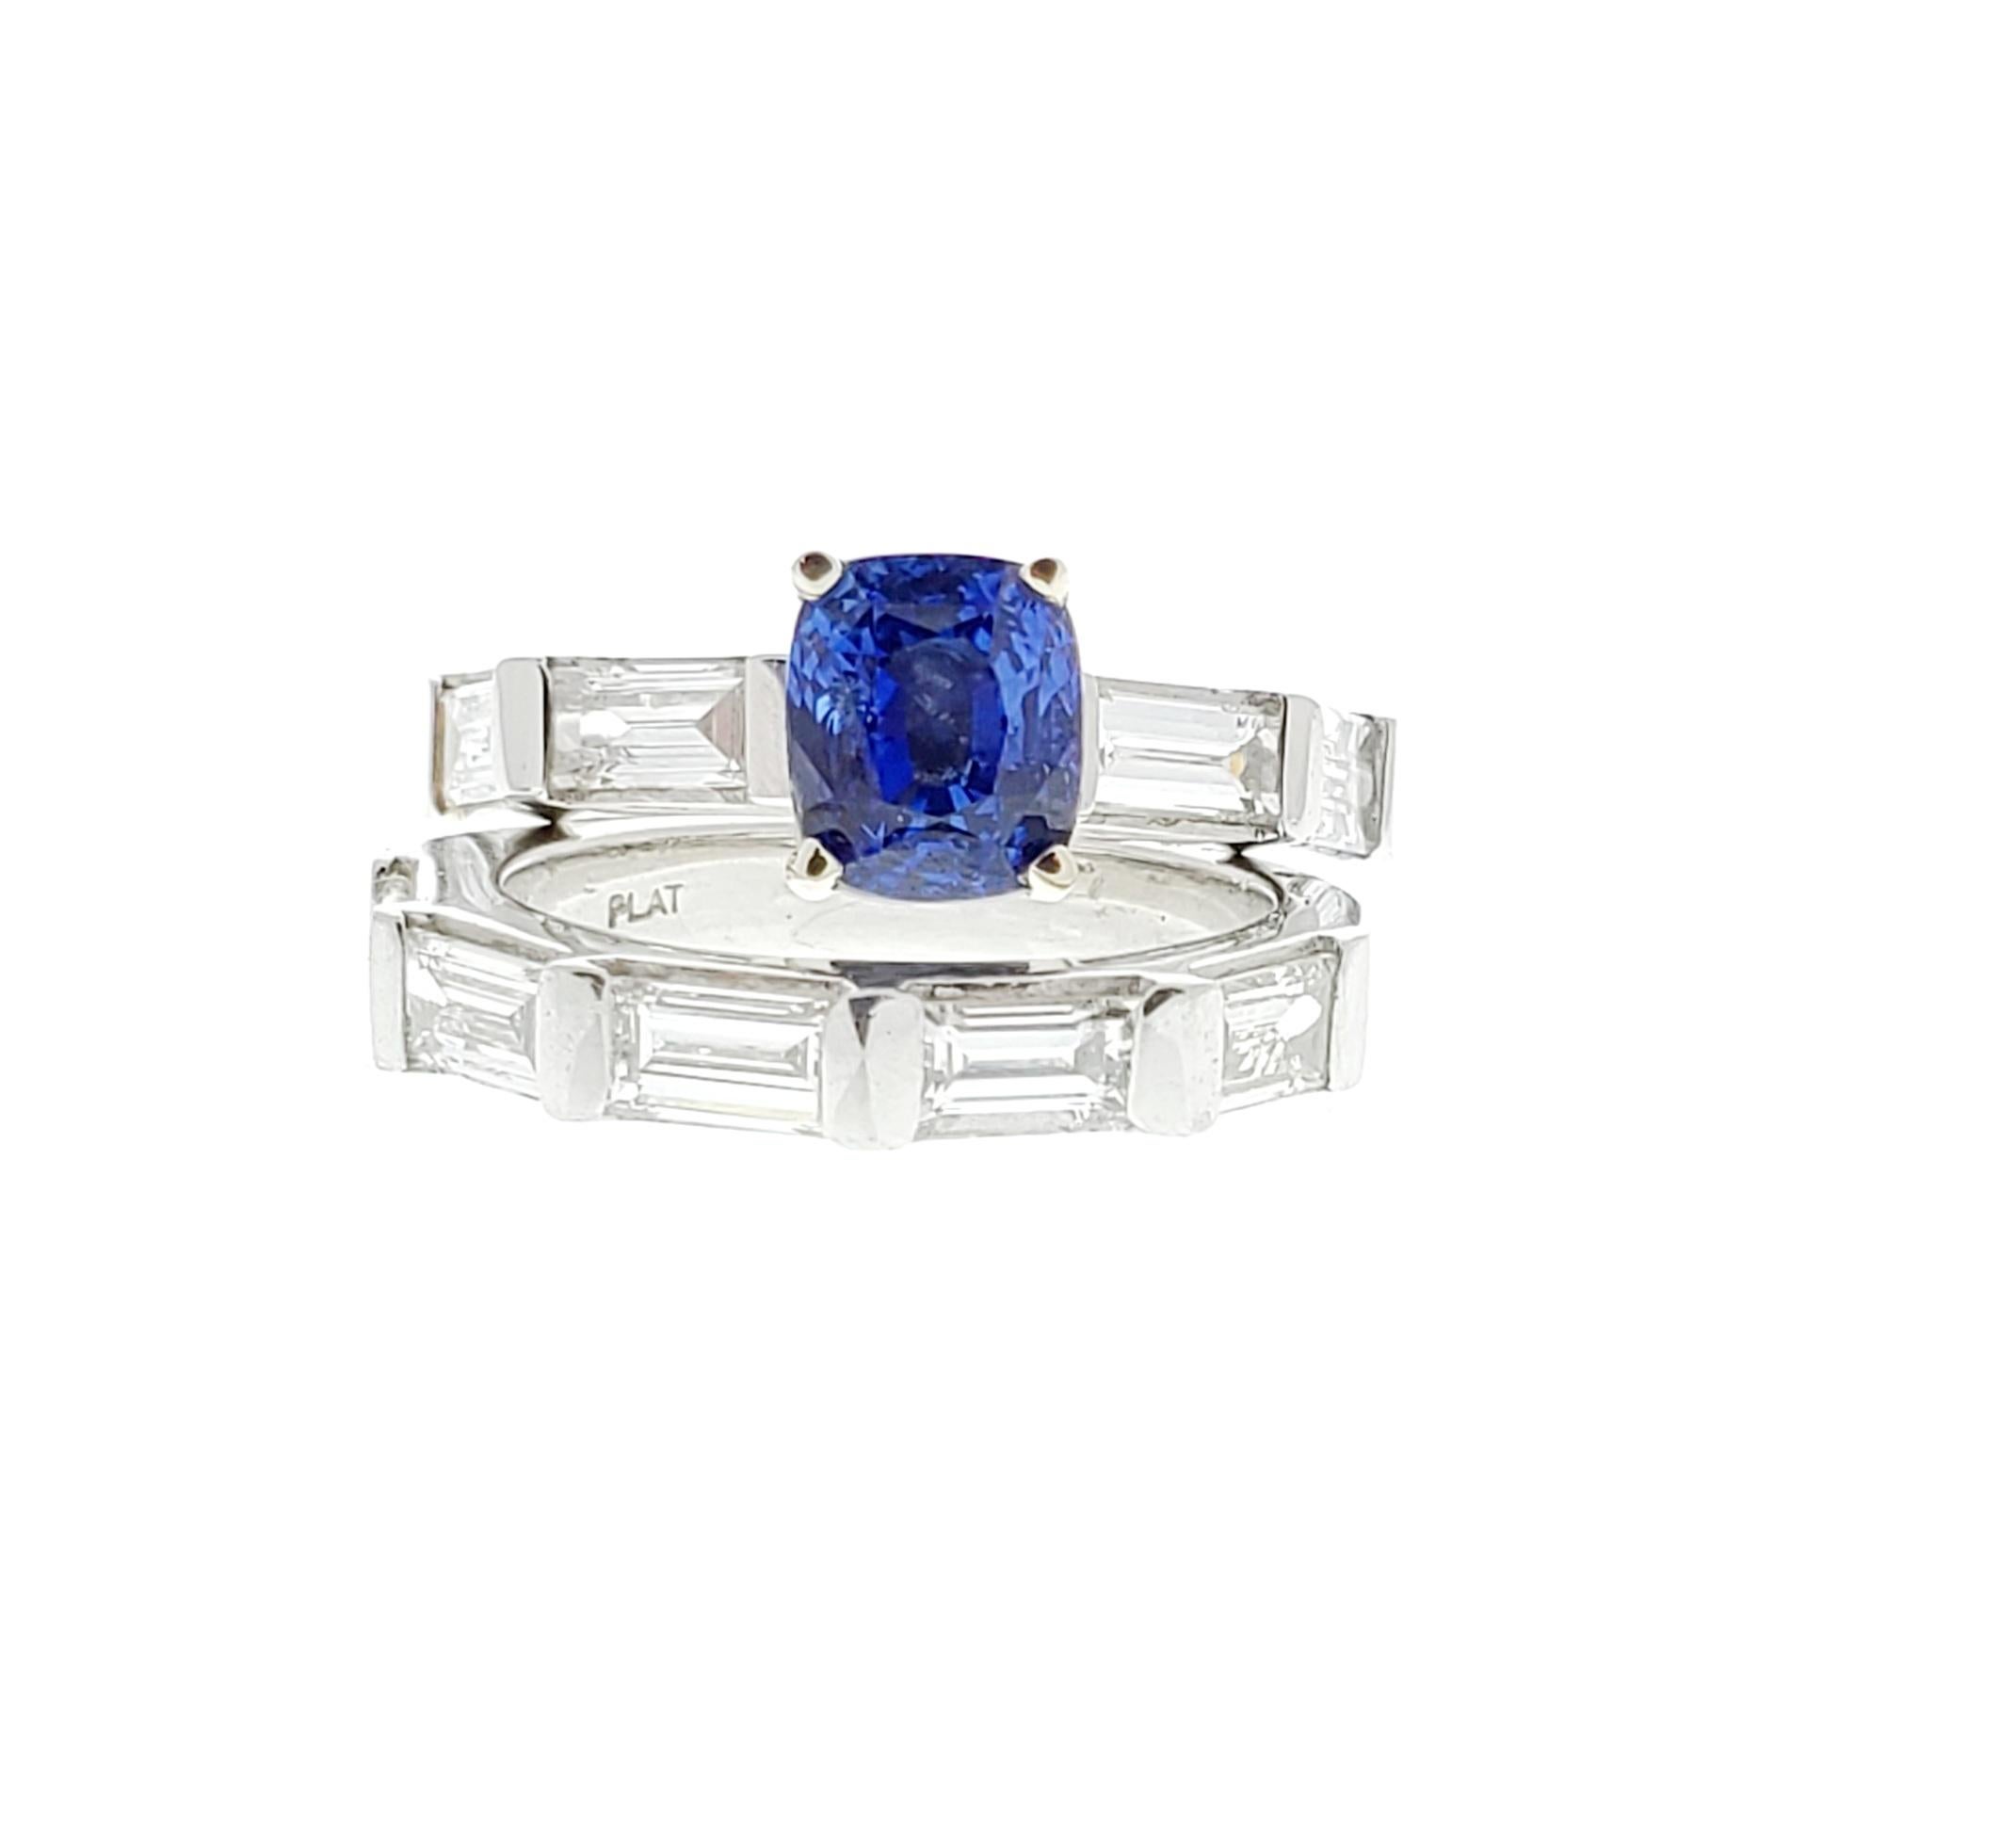 Designed in brightly polished platinum, this beautiful diamond and sapphire ring features a center-set cushion cut sapphire with a weight of 2.55 carat and exhibits an intense blue color with overall good saturation. This sapphire is complemented by